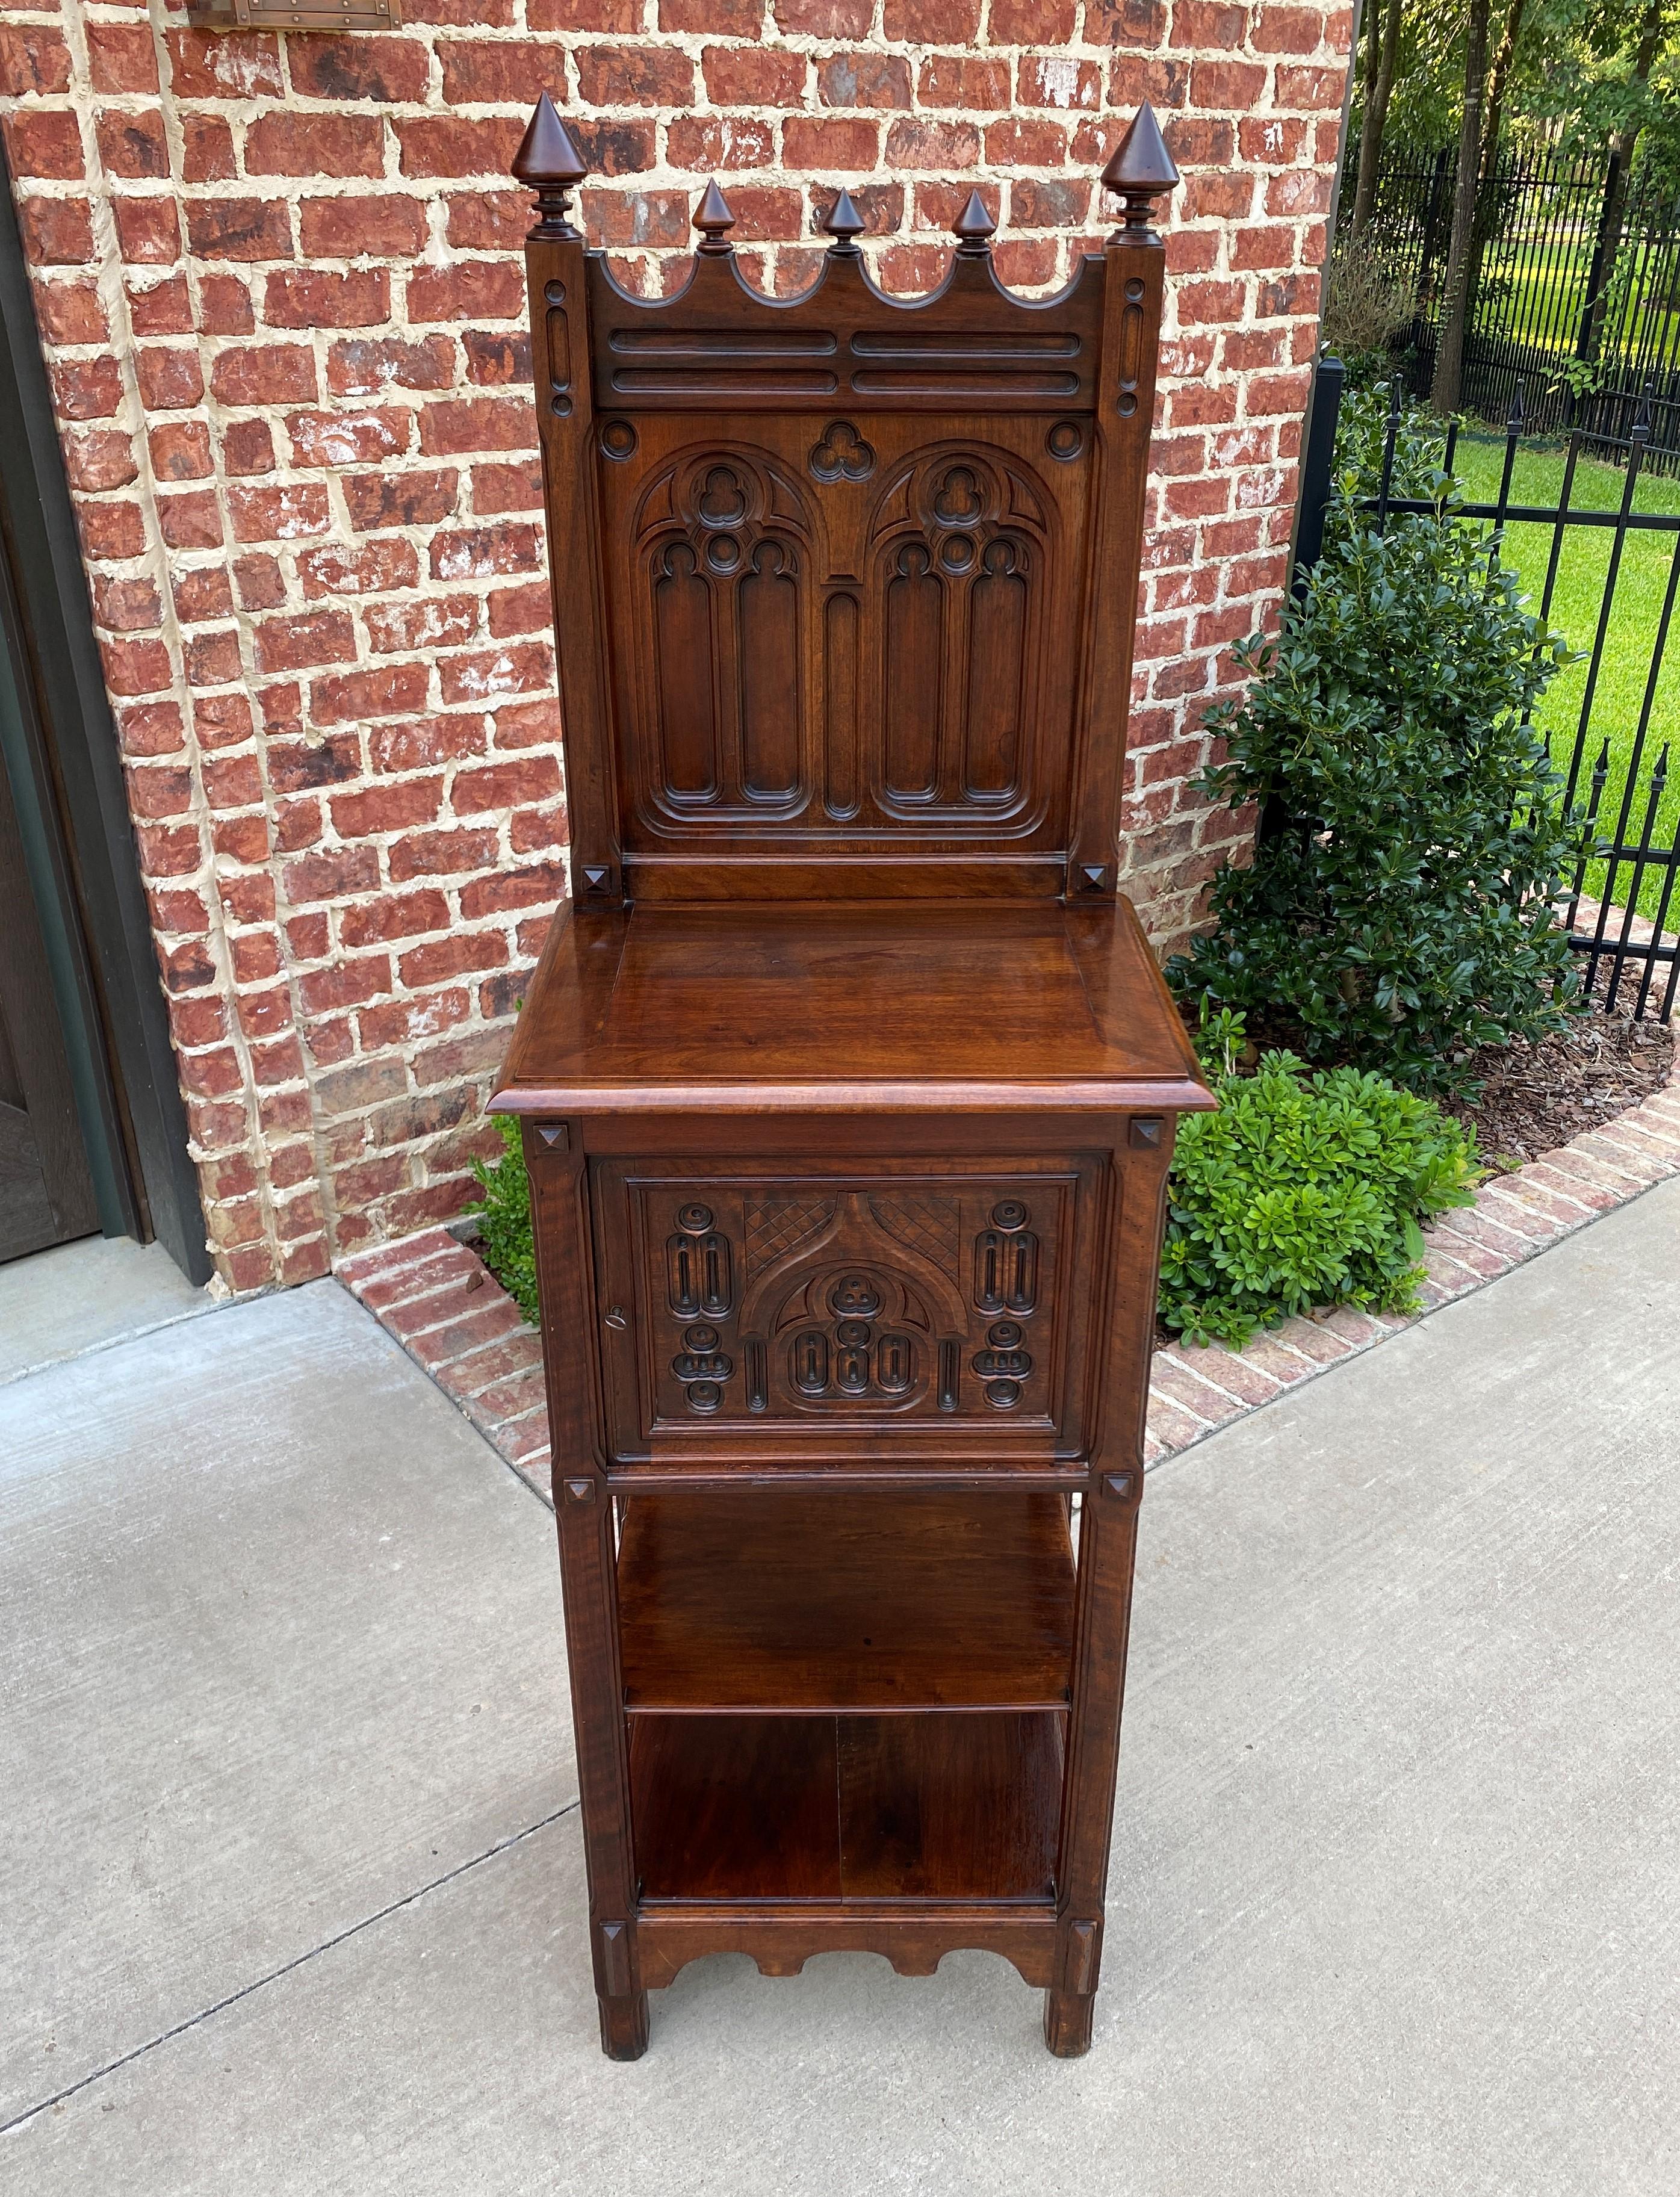 Antique French Cabinet Cupboard Pedestal Bookcase Bar Gothic Revival Petite 4